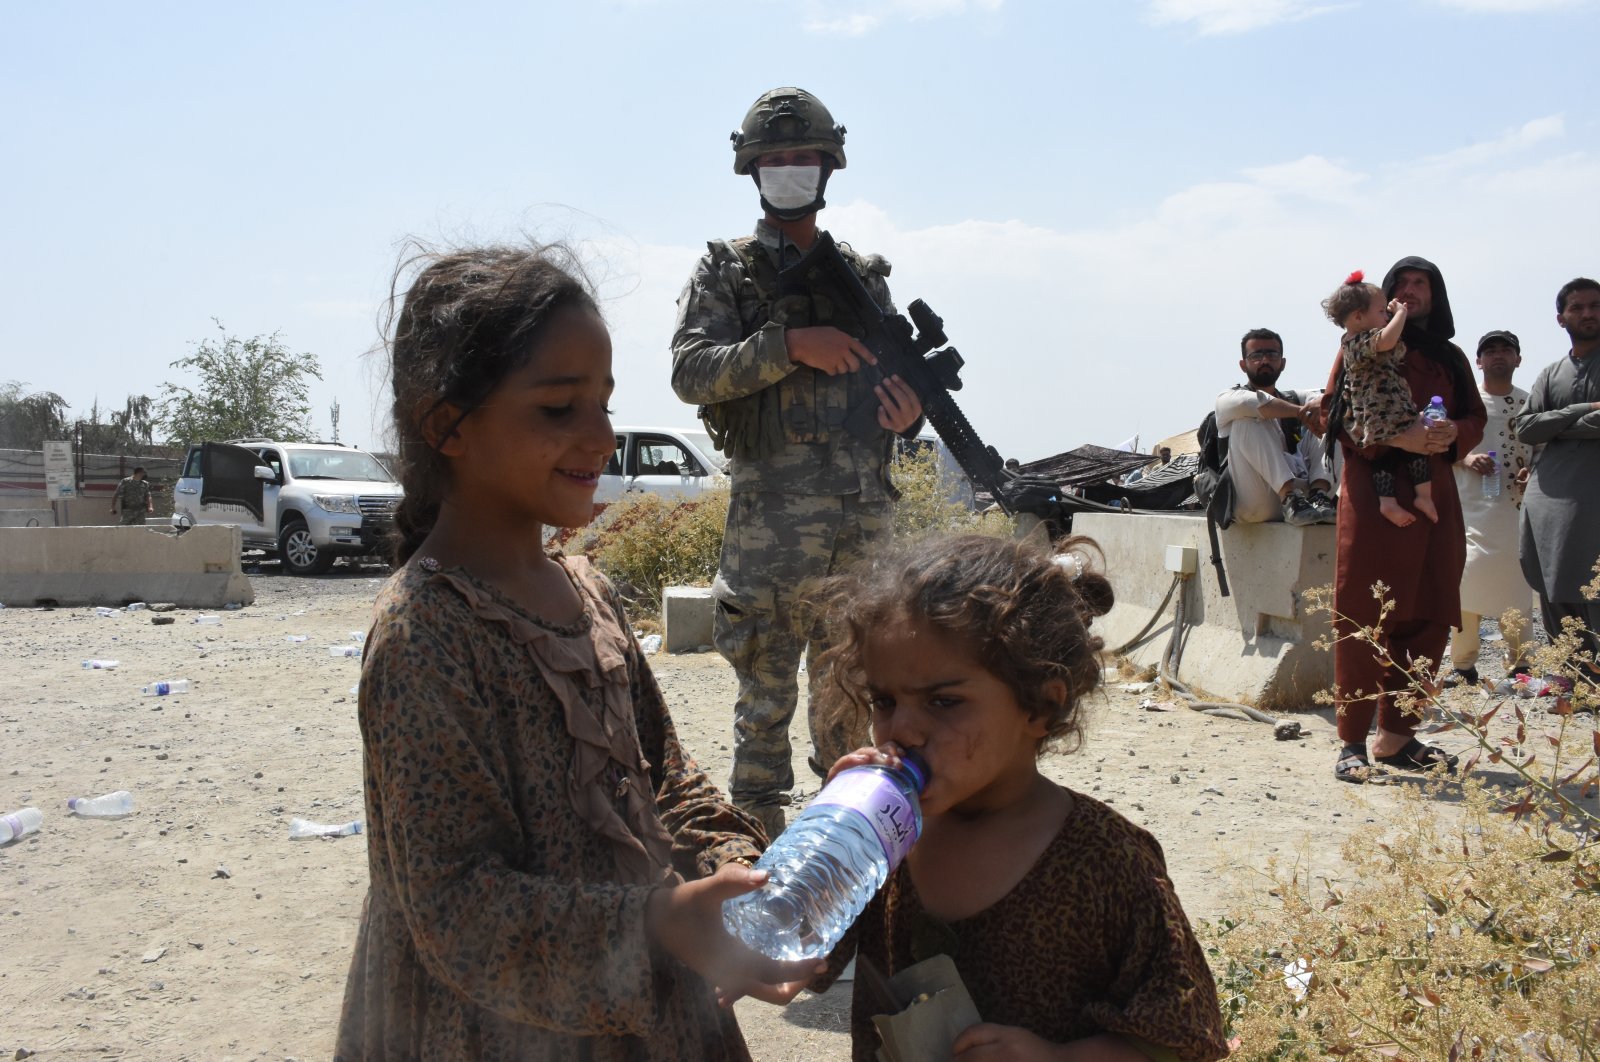 Afghan children drink water provided by Turkish soldiers near Kabul Hamid Karzai International Airport, Afghanistan, Aug. 22, 2021. (AA Photo)